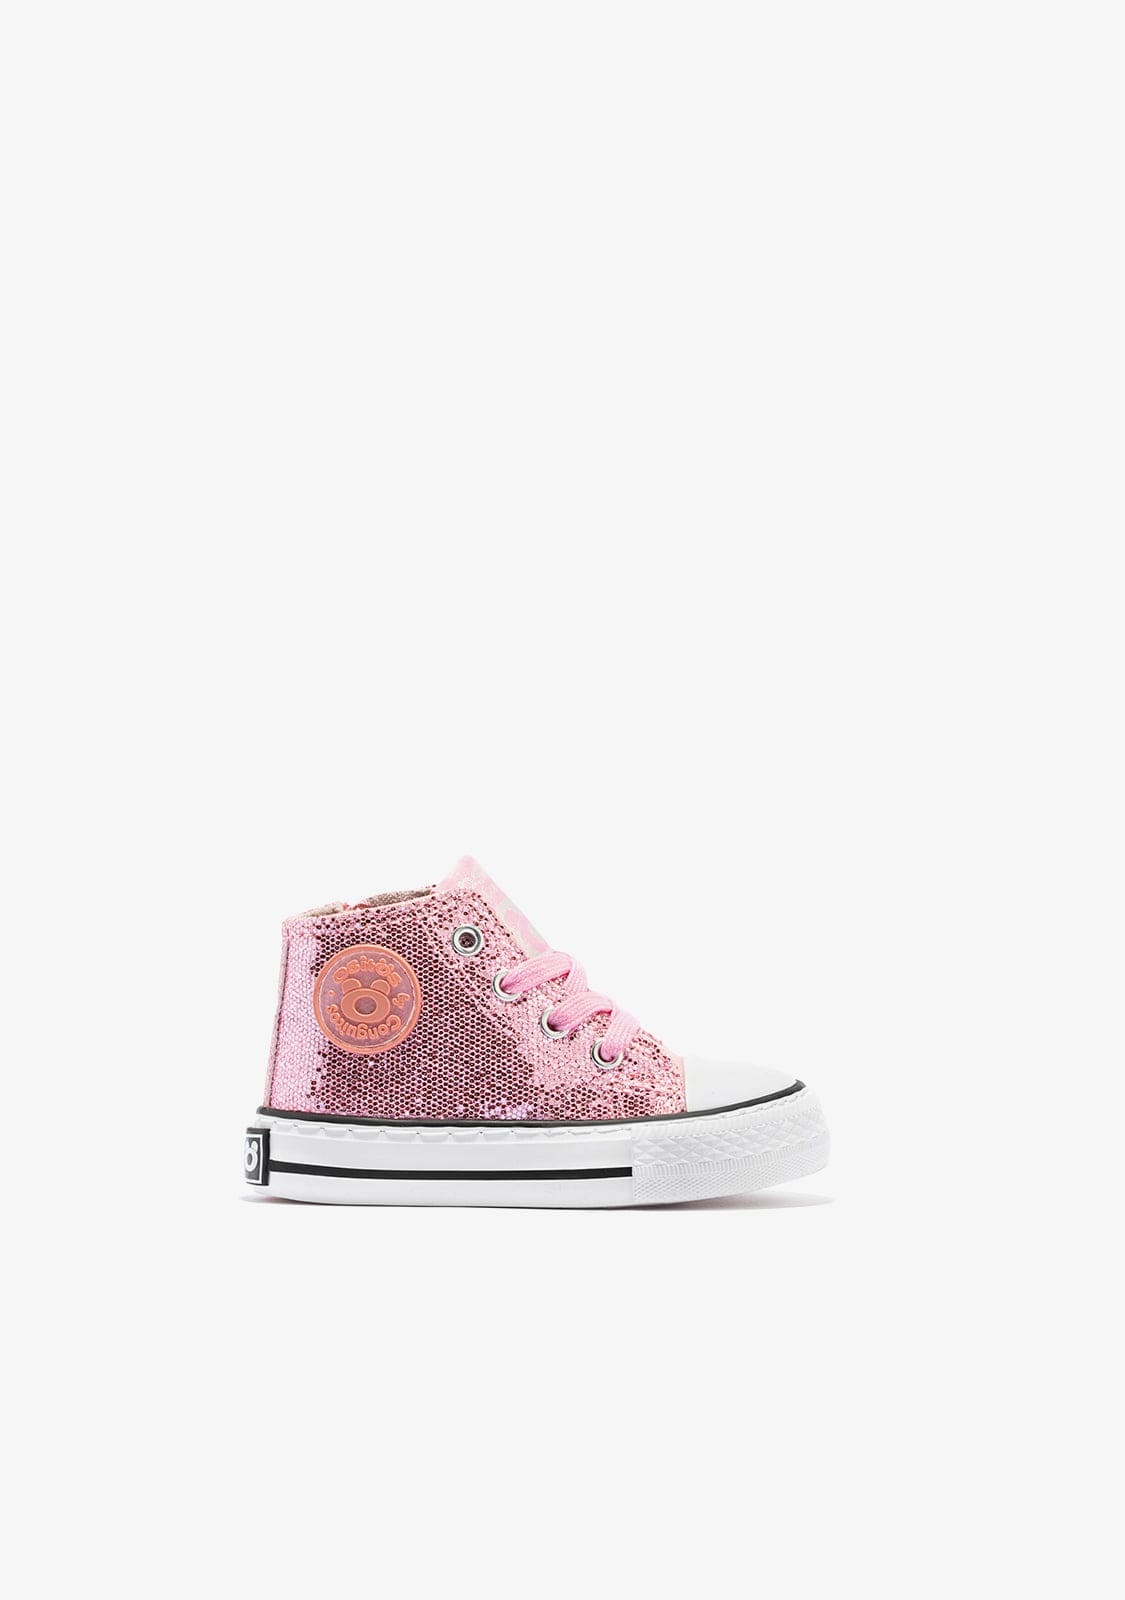 OSITO Shoes Baby's Pink Glitter Hi-Top Sneakers